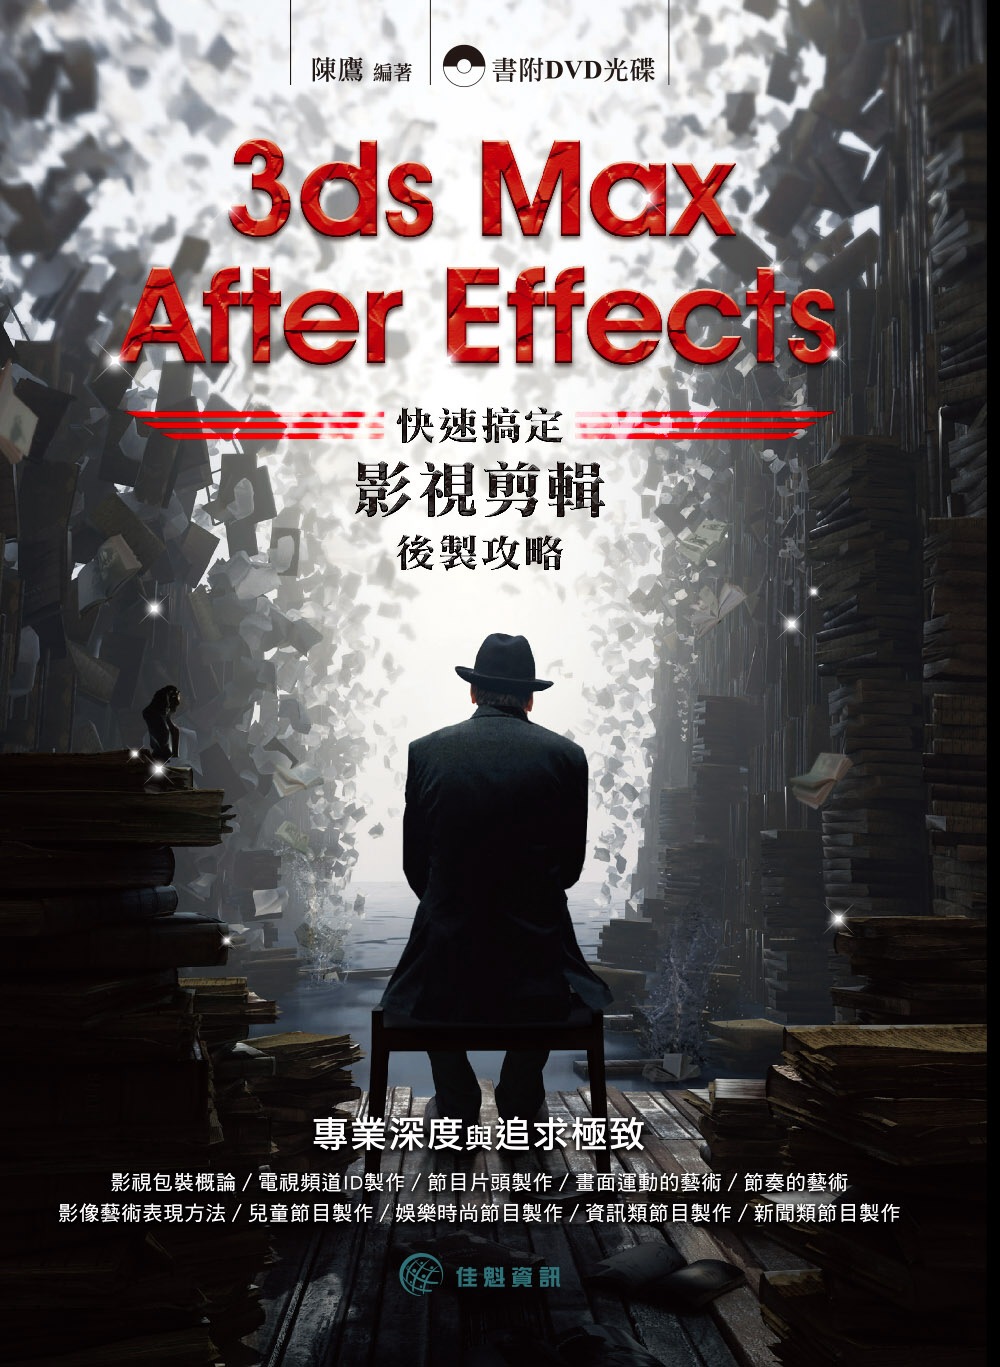 3ds Max+ After Effects 快速搞定影視剪...